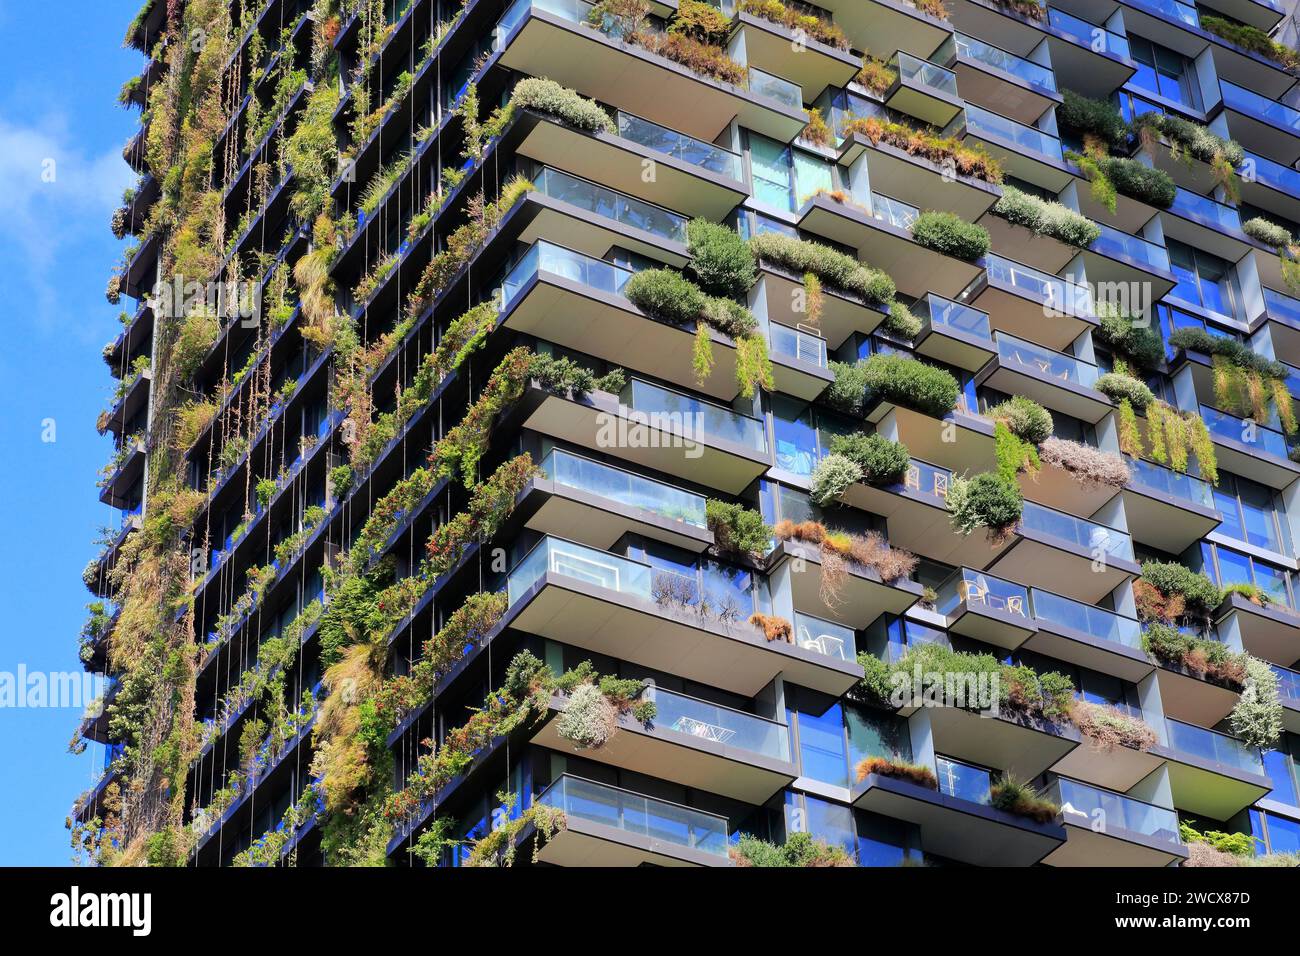 Australia, New South Wales, Sydney, Chippendale district, One Central Park, building with vertical hanging gardens designed by architects Jean Nouvel and Foster + Partners Stock Photo